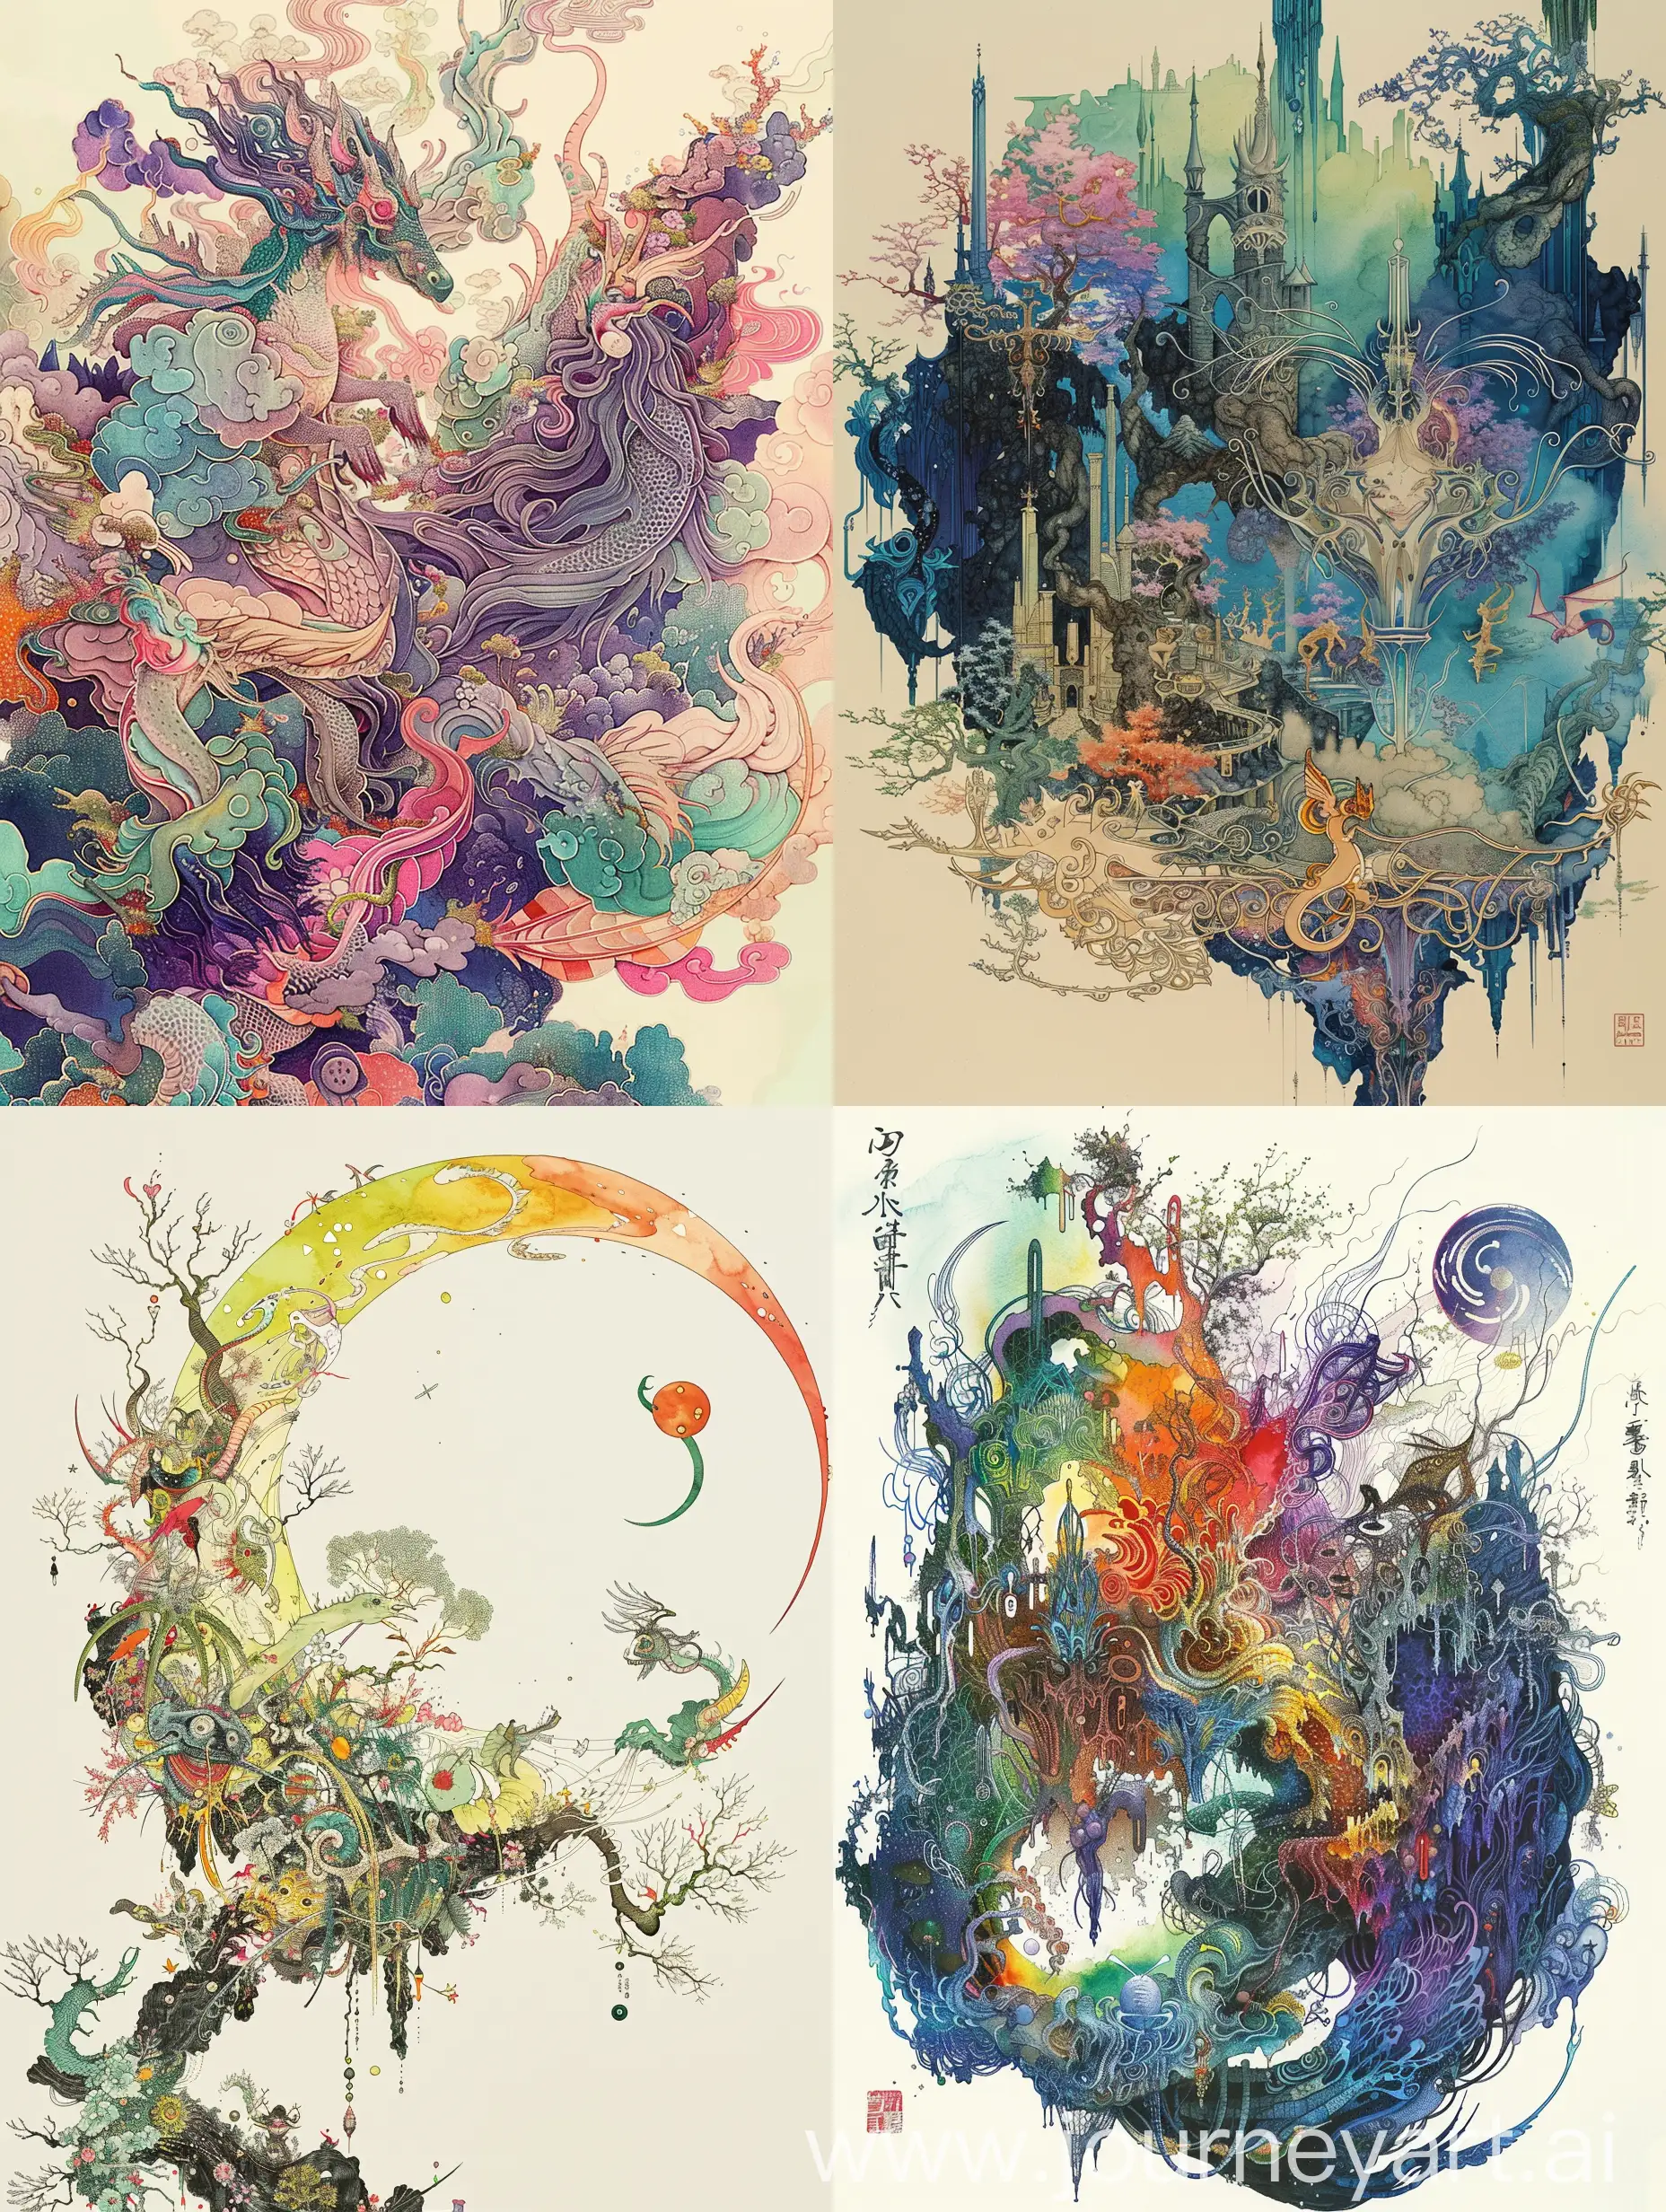 Ethereal-and-Intricate-Illustration-by-Yoshitaka-Amano-Featuring-Fantastical-Creatures-and-Dreamlike-Landscapes